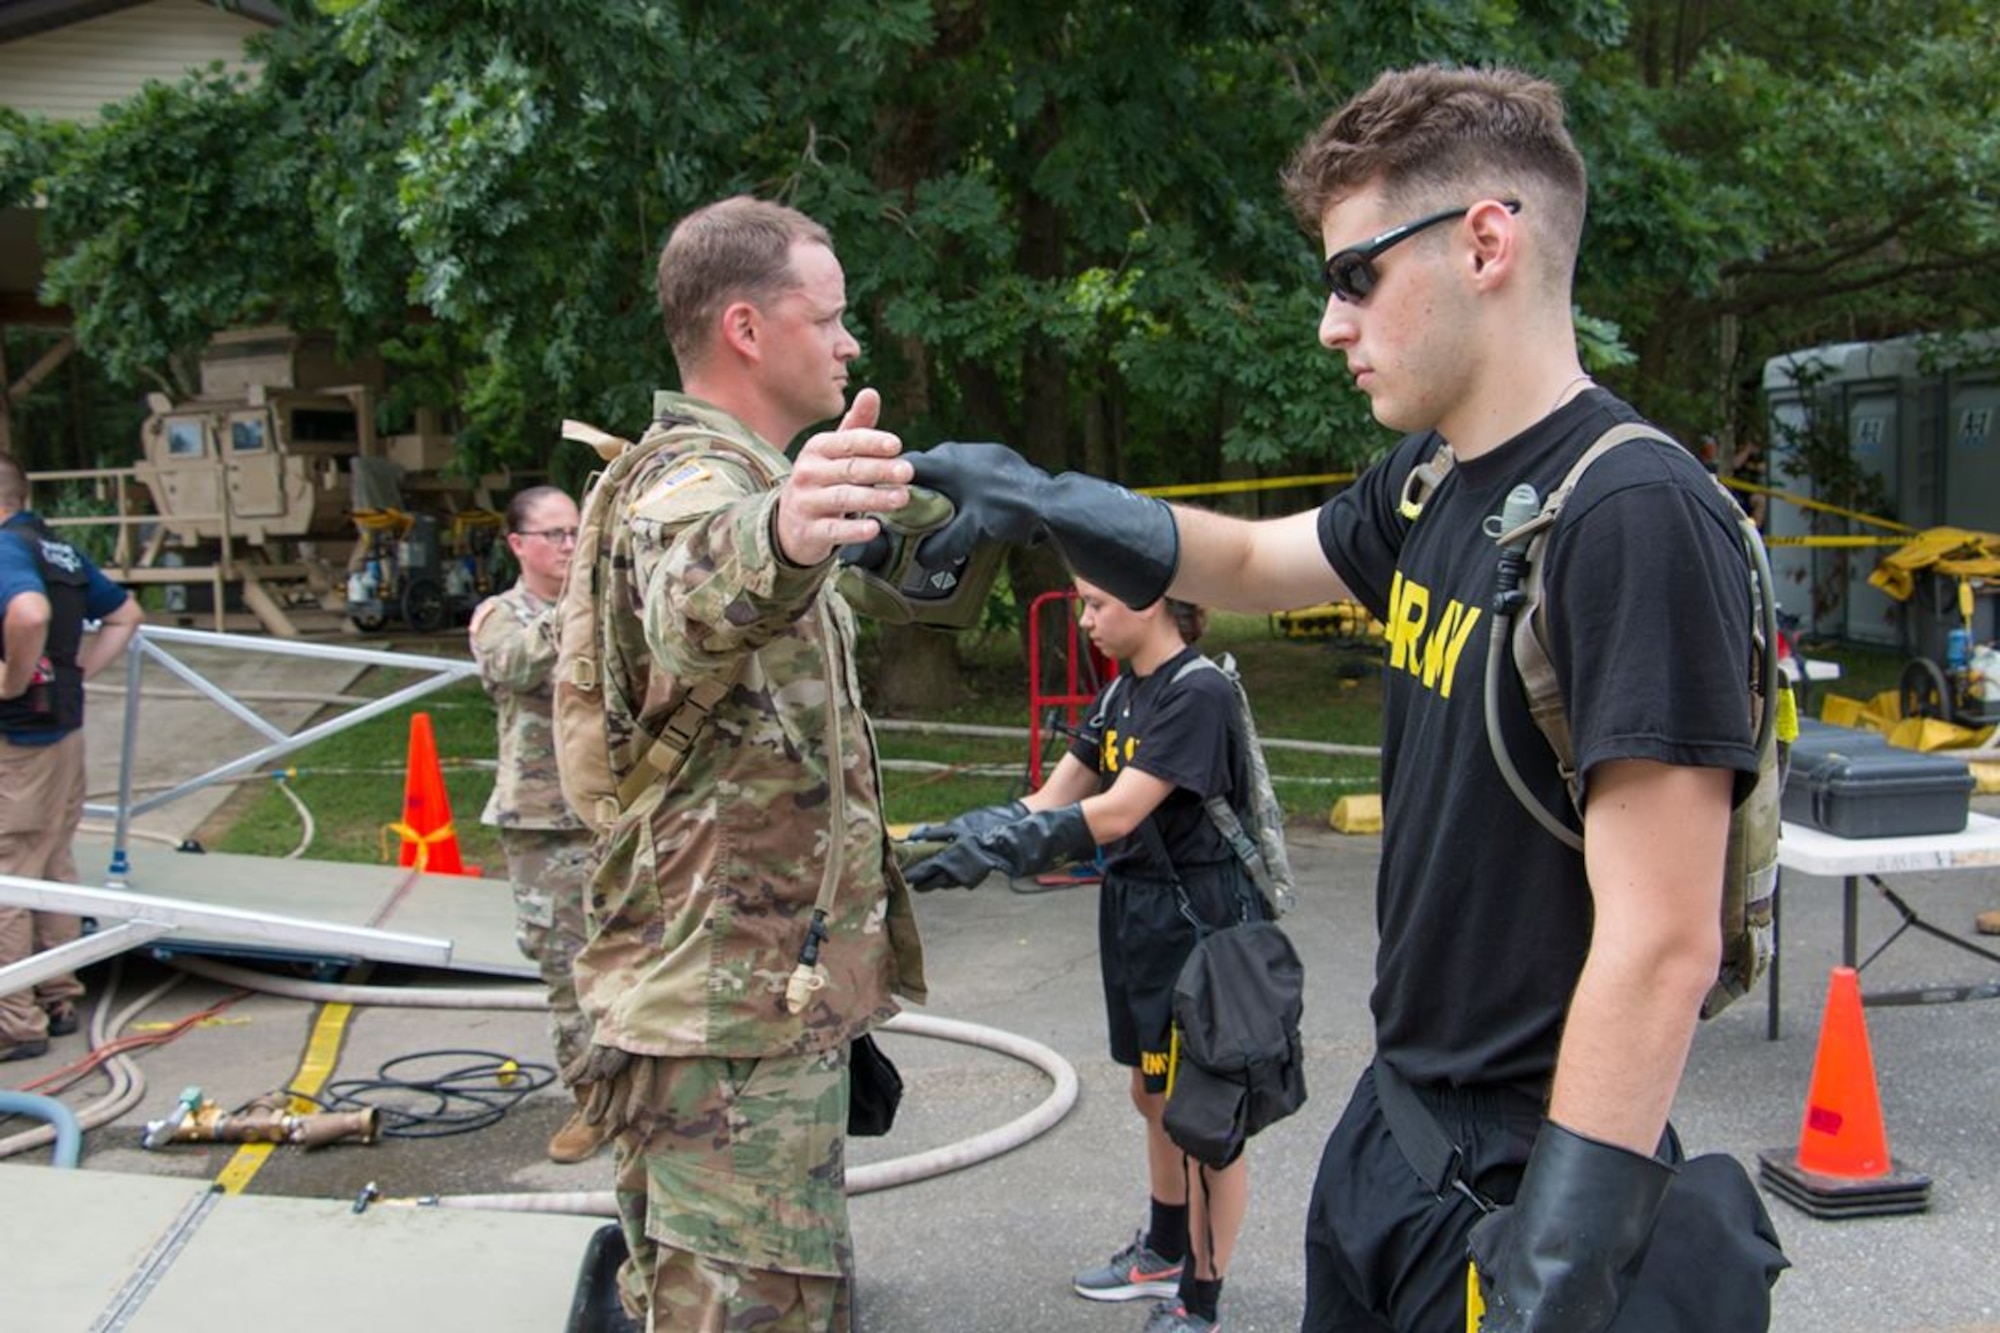 Members of the Delaware National Guard participate in Operation HIGHBALL, July 12, 2019 in New Castle, Del. More than 300 personnel from 24 different civilian, state and federal agencies and four states, Delaware, Pennsylvania, Virginia, West Virginia, along with Washington, D.C., participated in the exercise. (U.S. National Guard Photo by Mr. Bernie Kale)